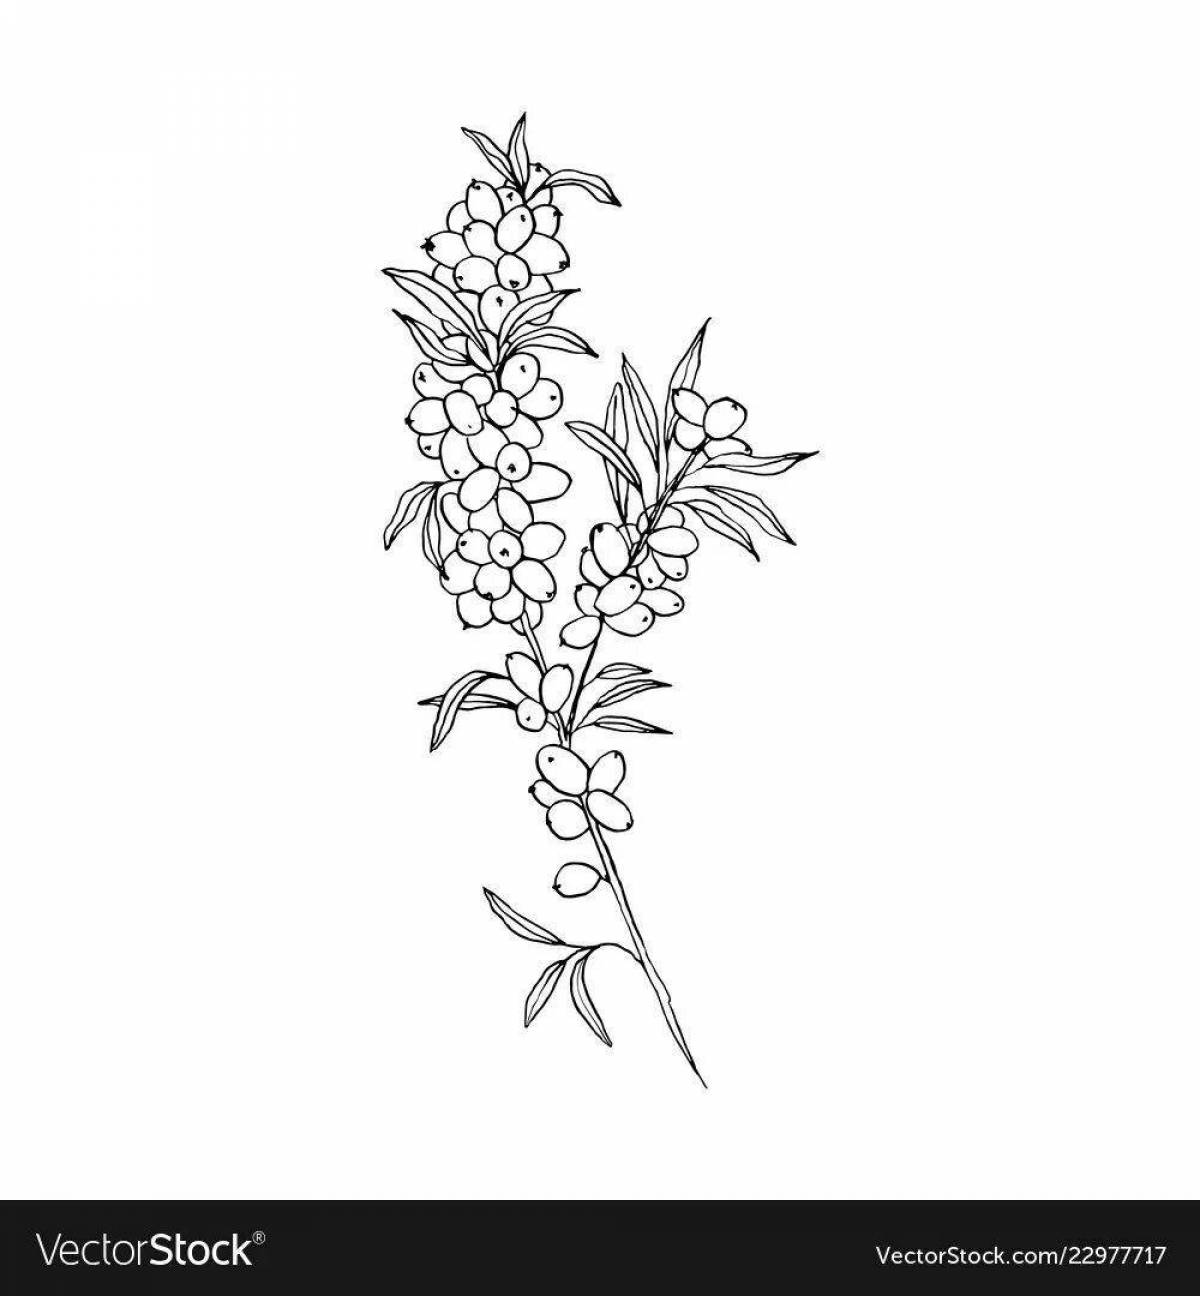 Playful sea buckthorn coloring page for kids